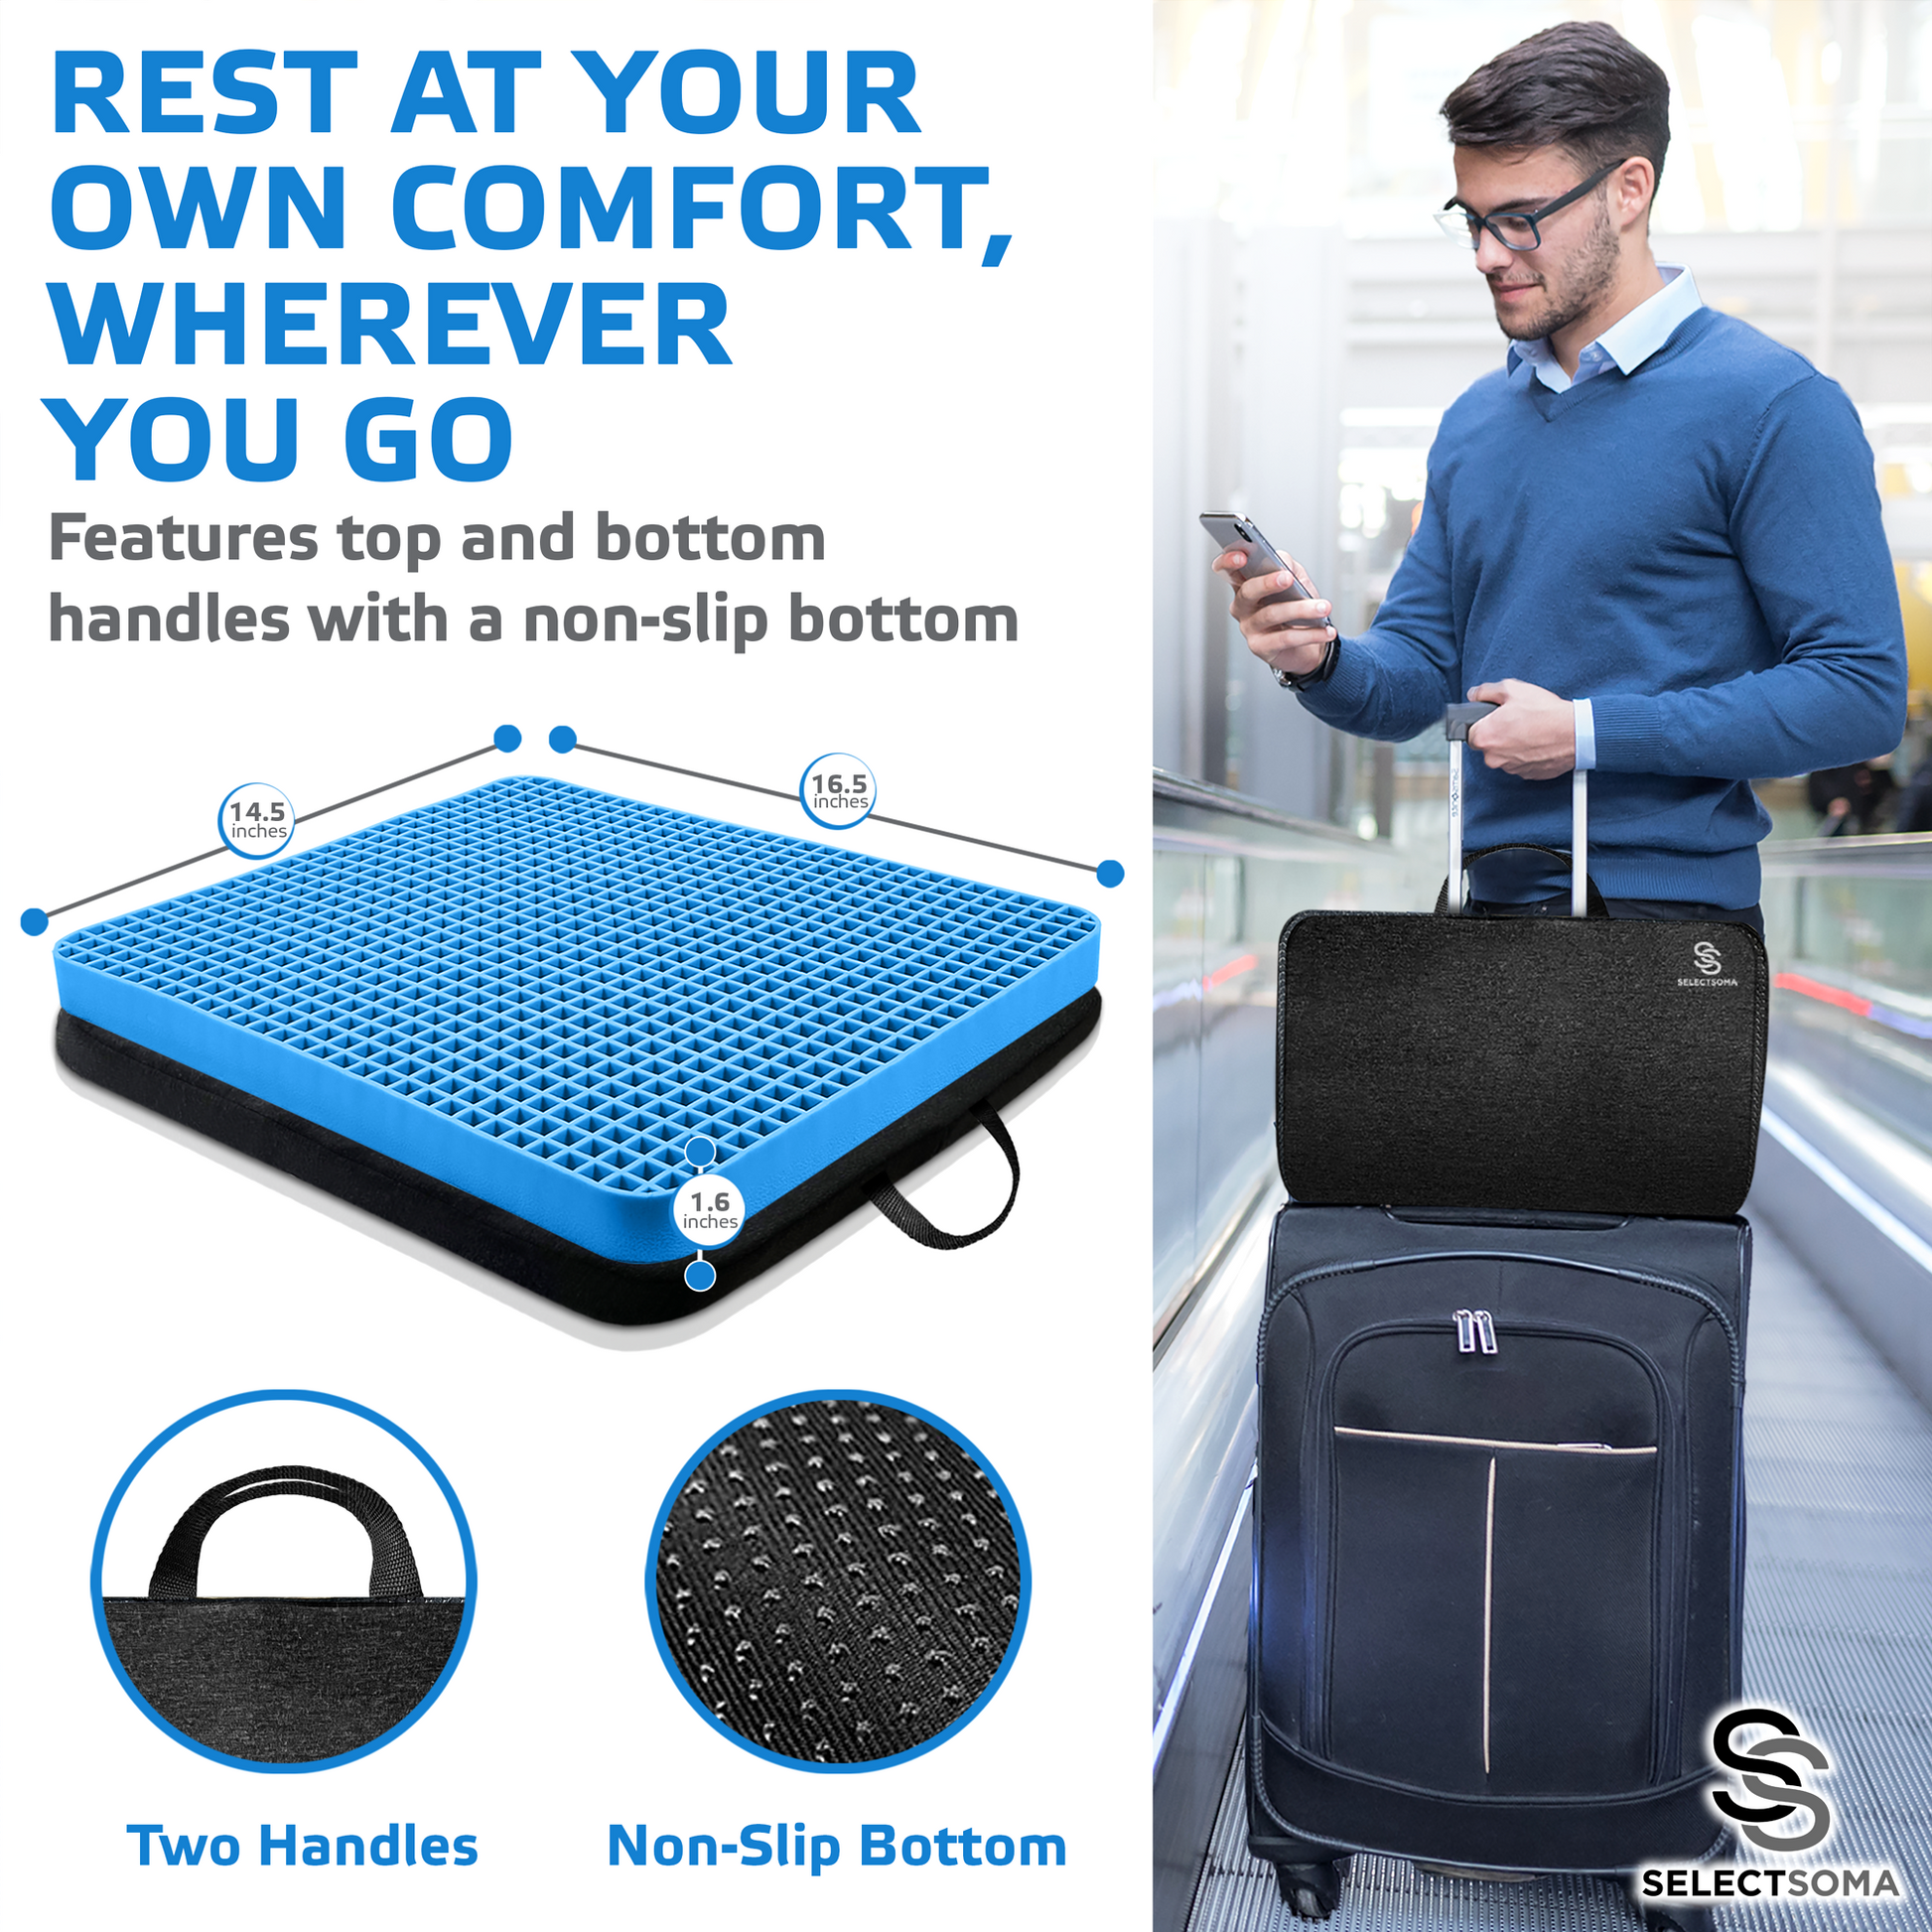 The Traveler's Packable Gel Seat Cushion